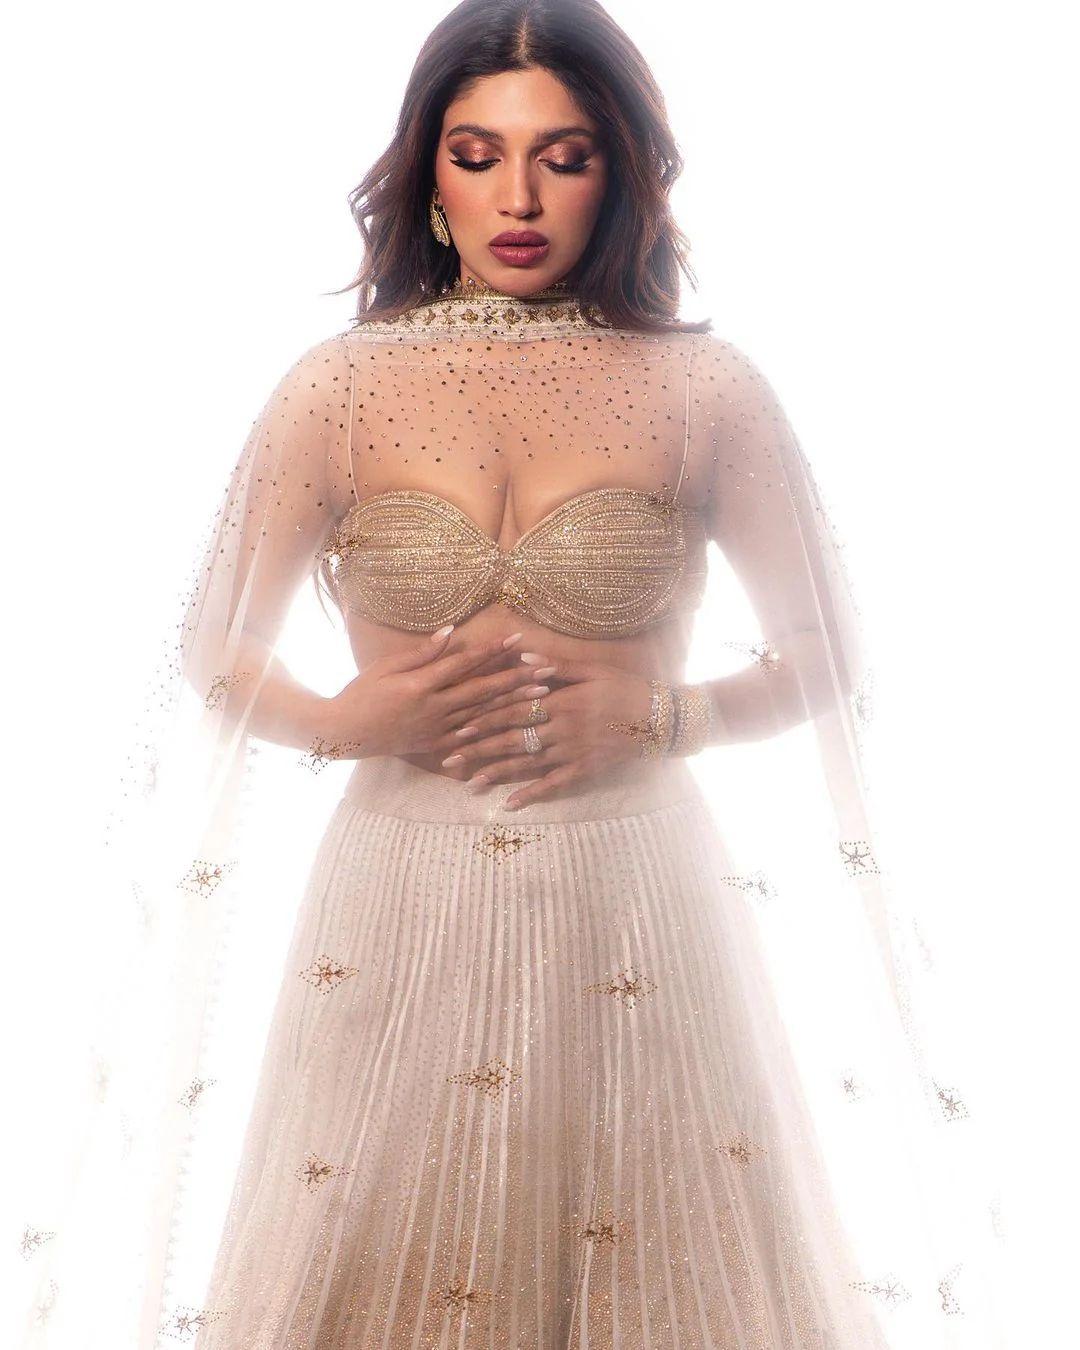 Bhumi mesmerizes in an all-white lehenga, reimagined with a modern twist.